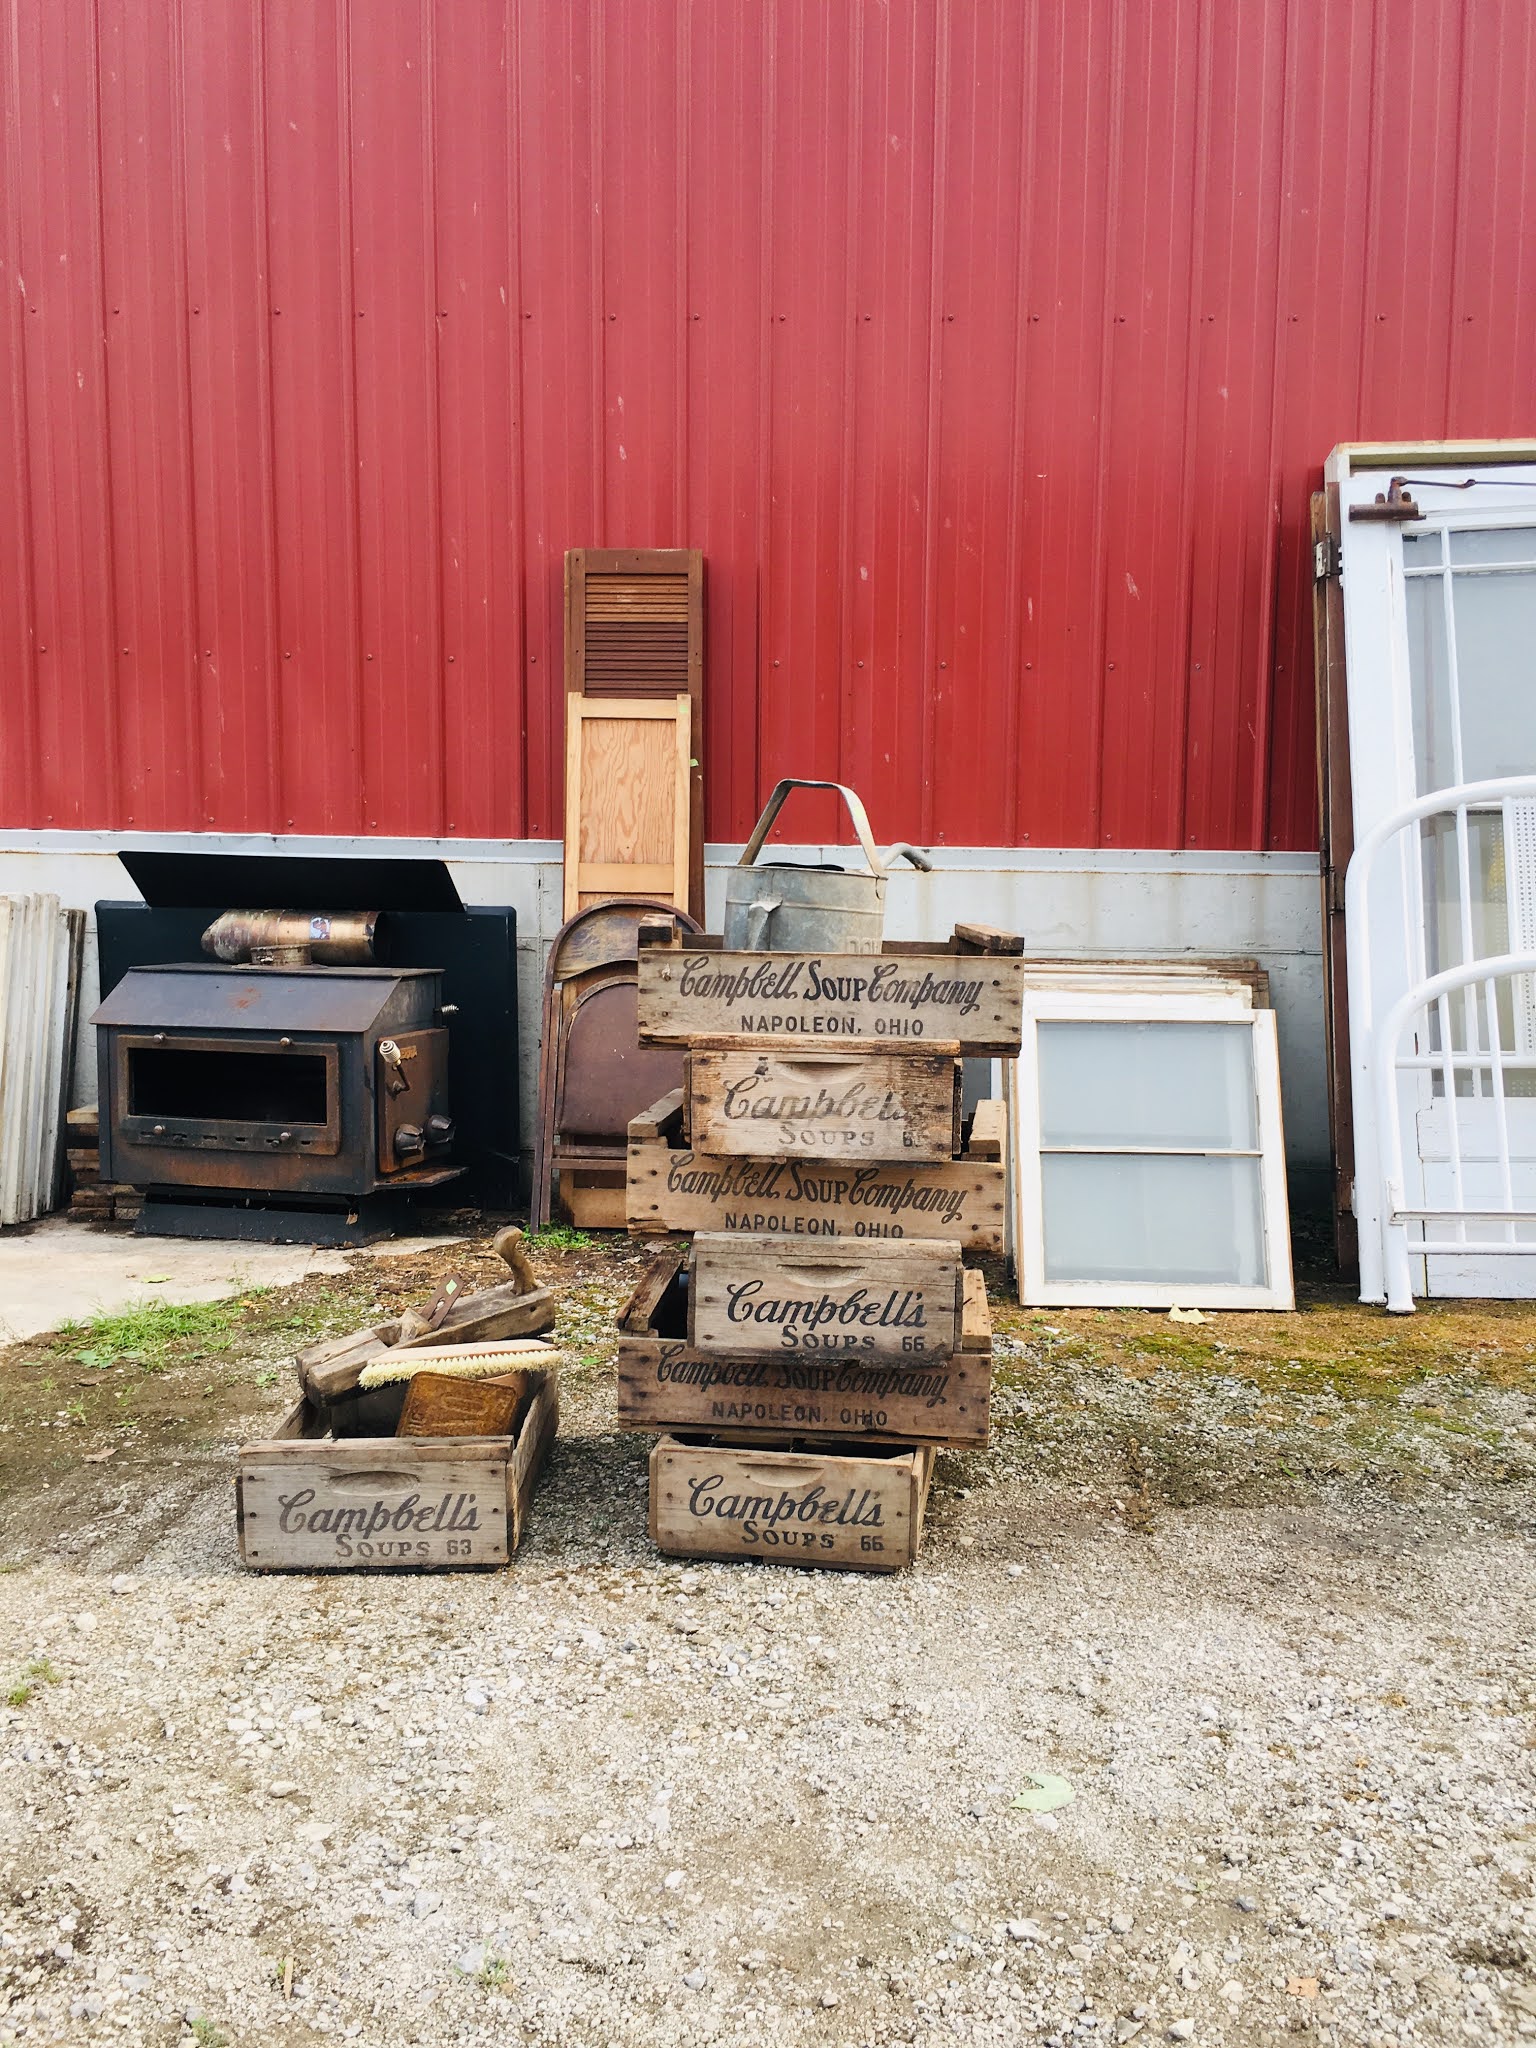 Vintage Campbell's soup crates at a Midwestern barn sale